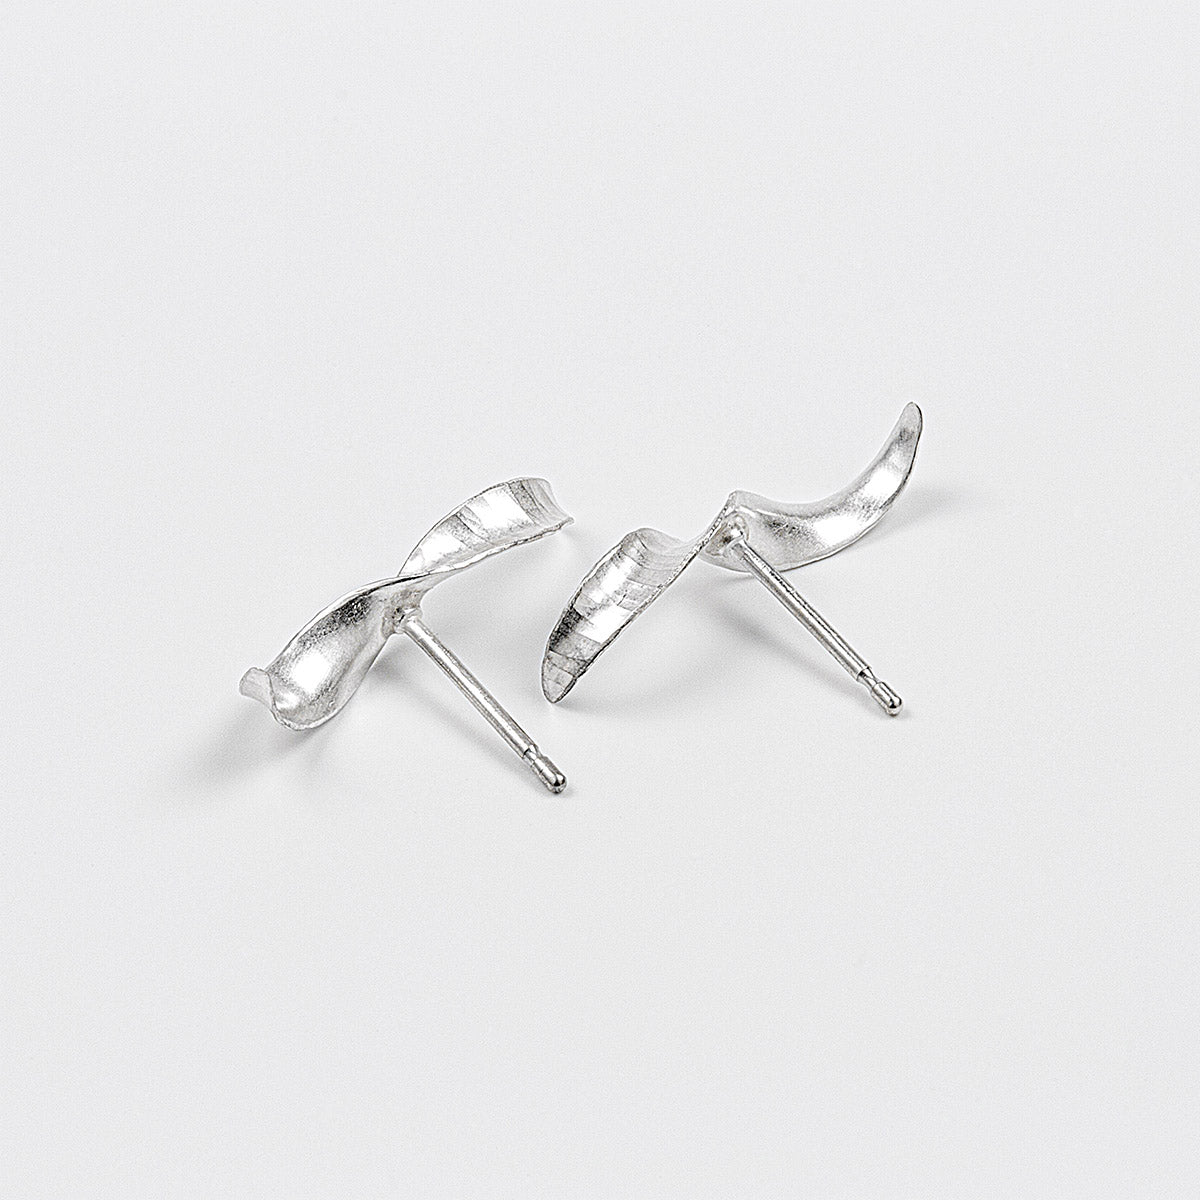 A pair of simple mirror-image silver twist earrings. They each have a stretched-S shape, a hammered texture, non-shiny finish and glittering edges. Shown on a white background, with the two at different angles.